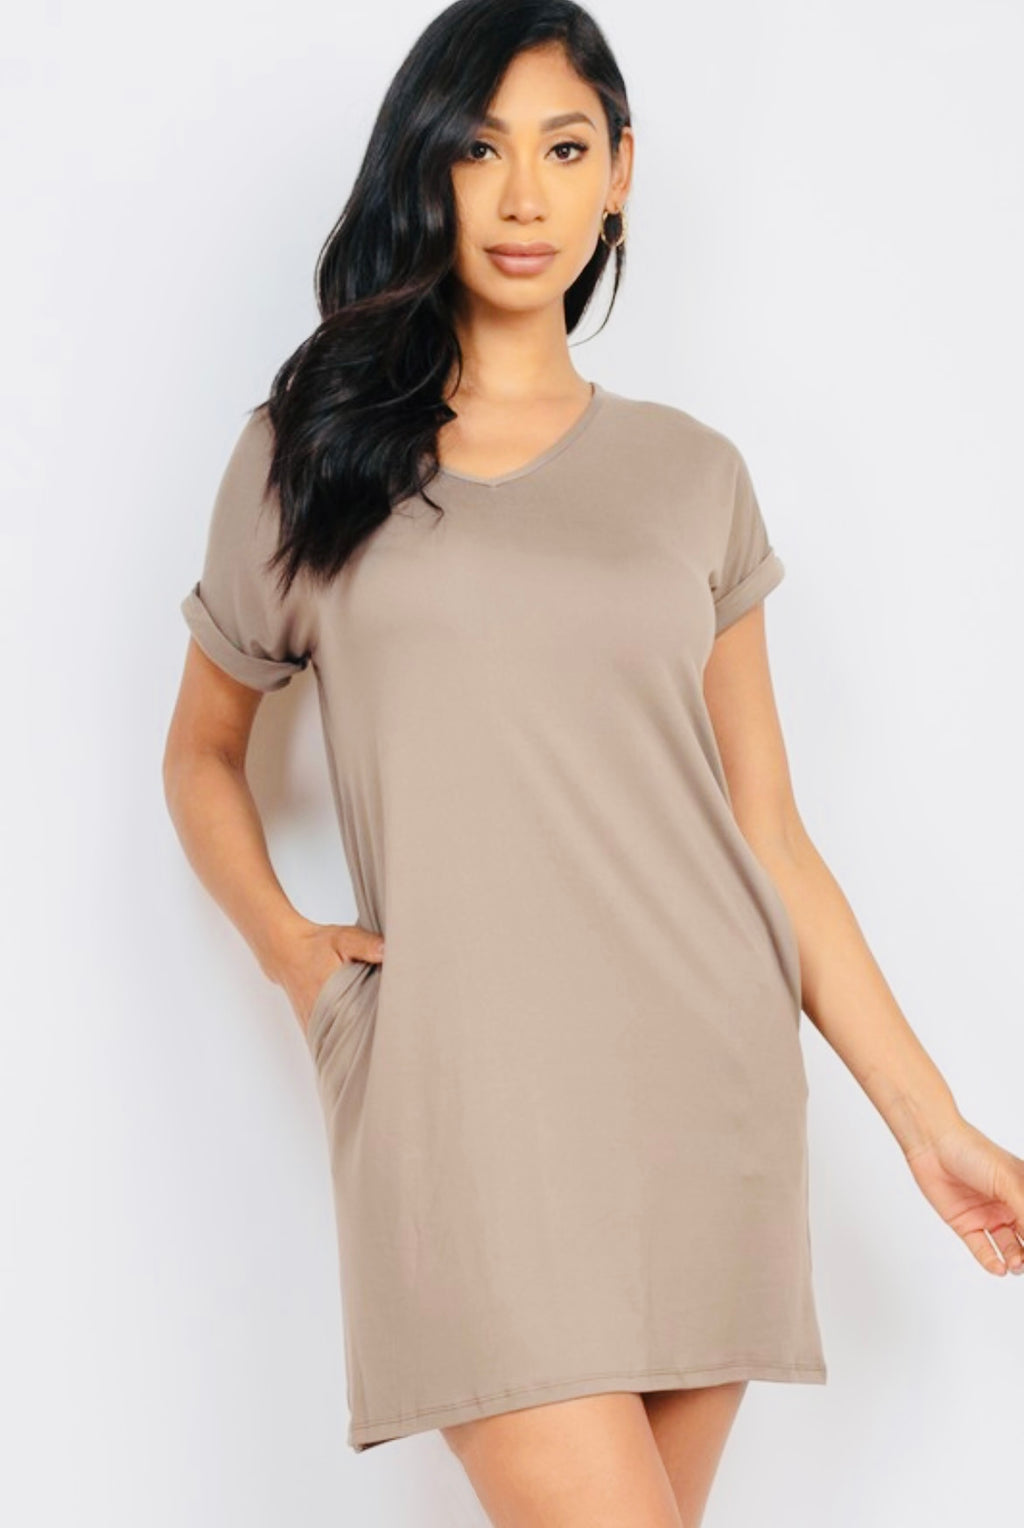 Loose and relaxed fit little short dress by pagnshop - Short